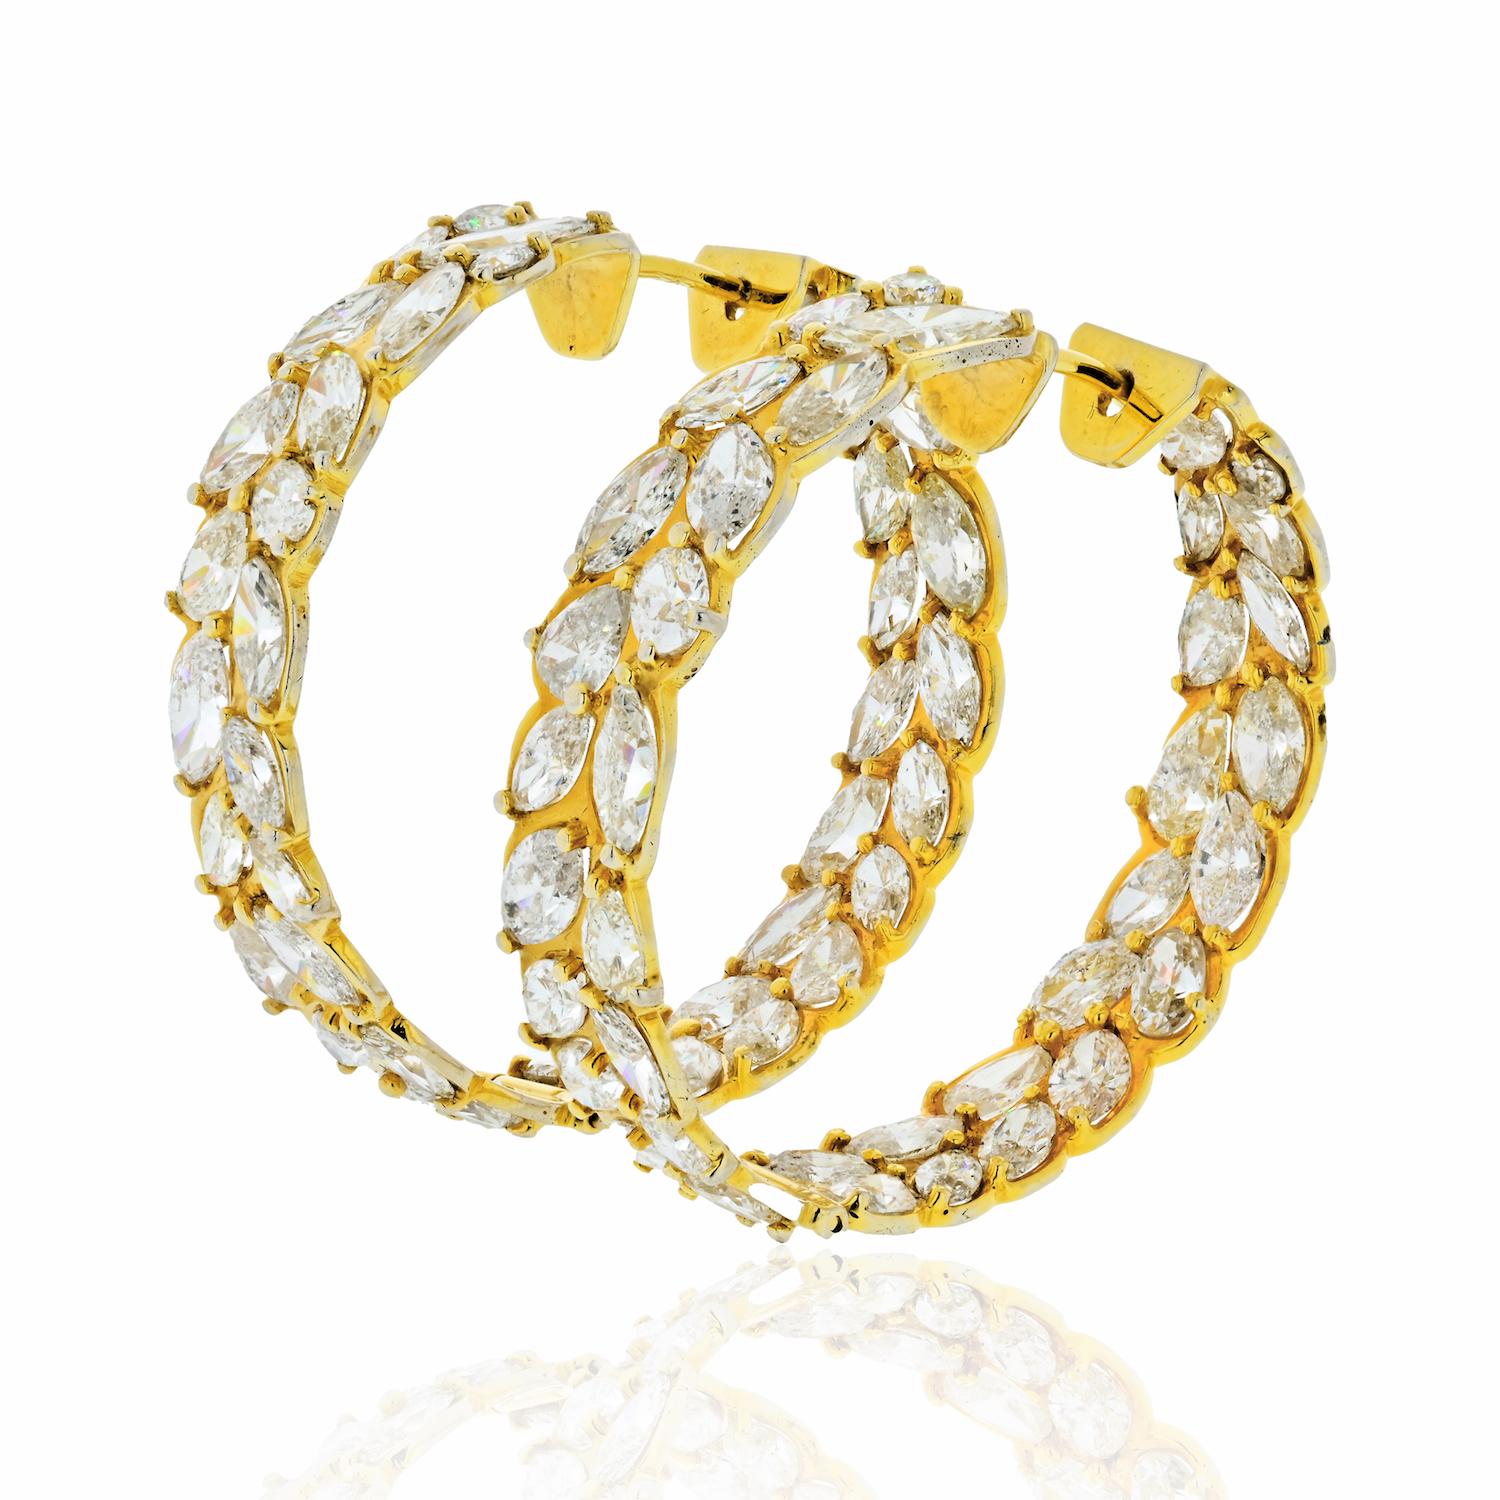 A bold new design, with a definitively luxury feel, our marquise-cut diamond Hoops feature eye-catching layout punctuated with mixed-cut diamonds inside and out. 
25 Carat inside and out diamond hoop earrings. 
Marquise-Cut Diamonds: 60